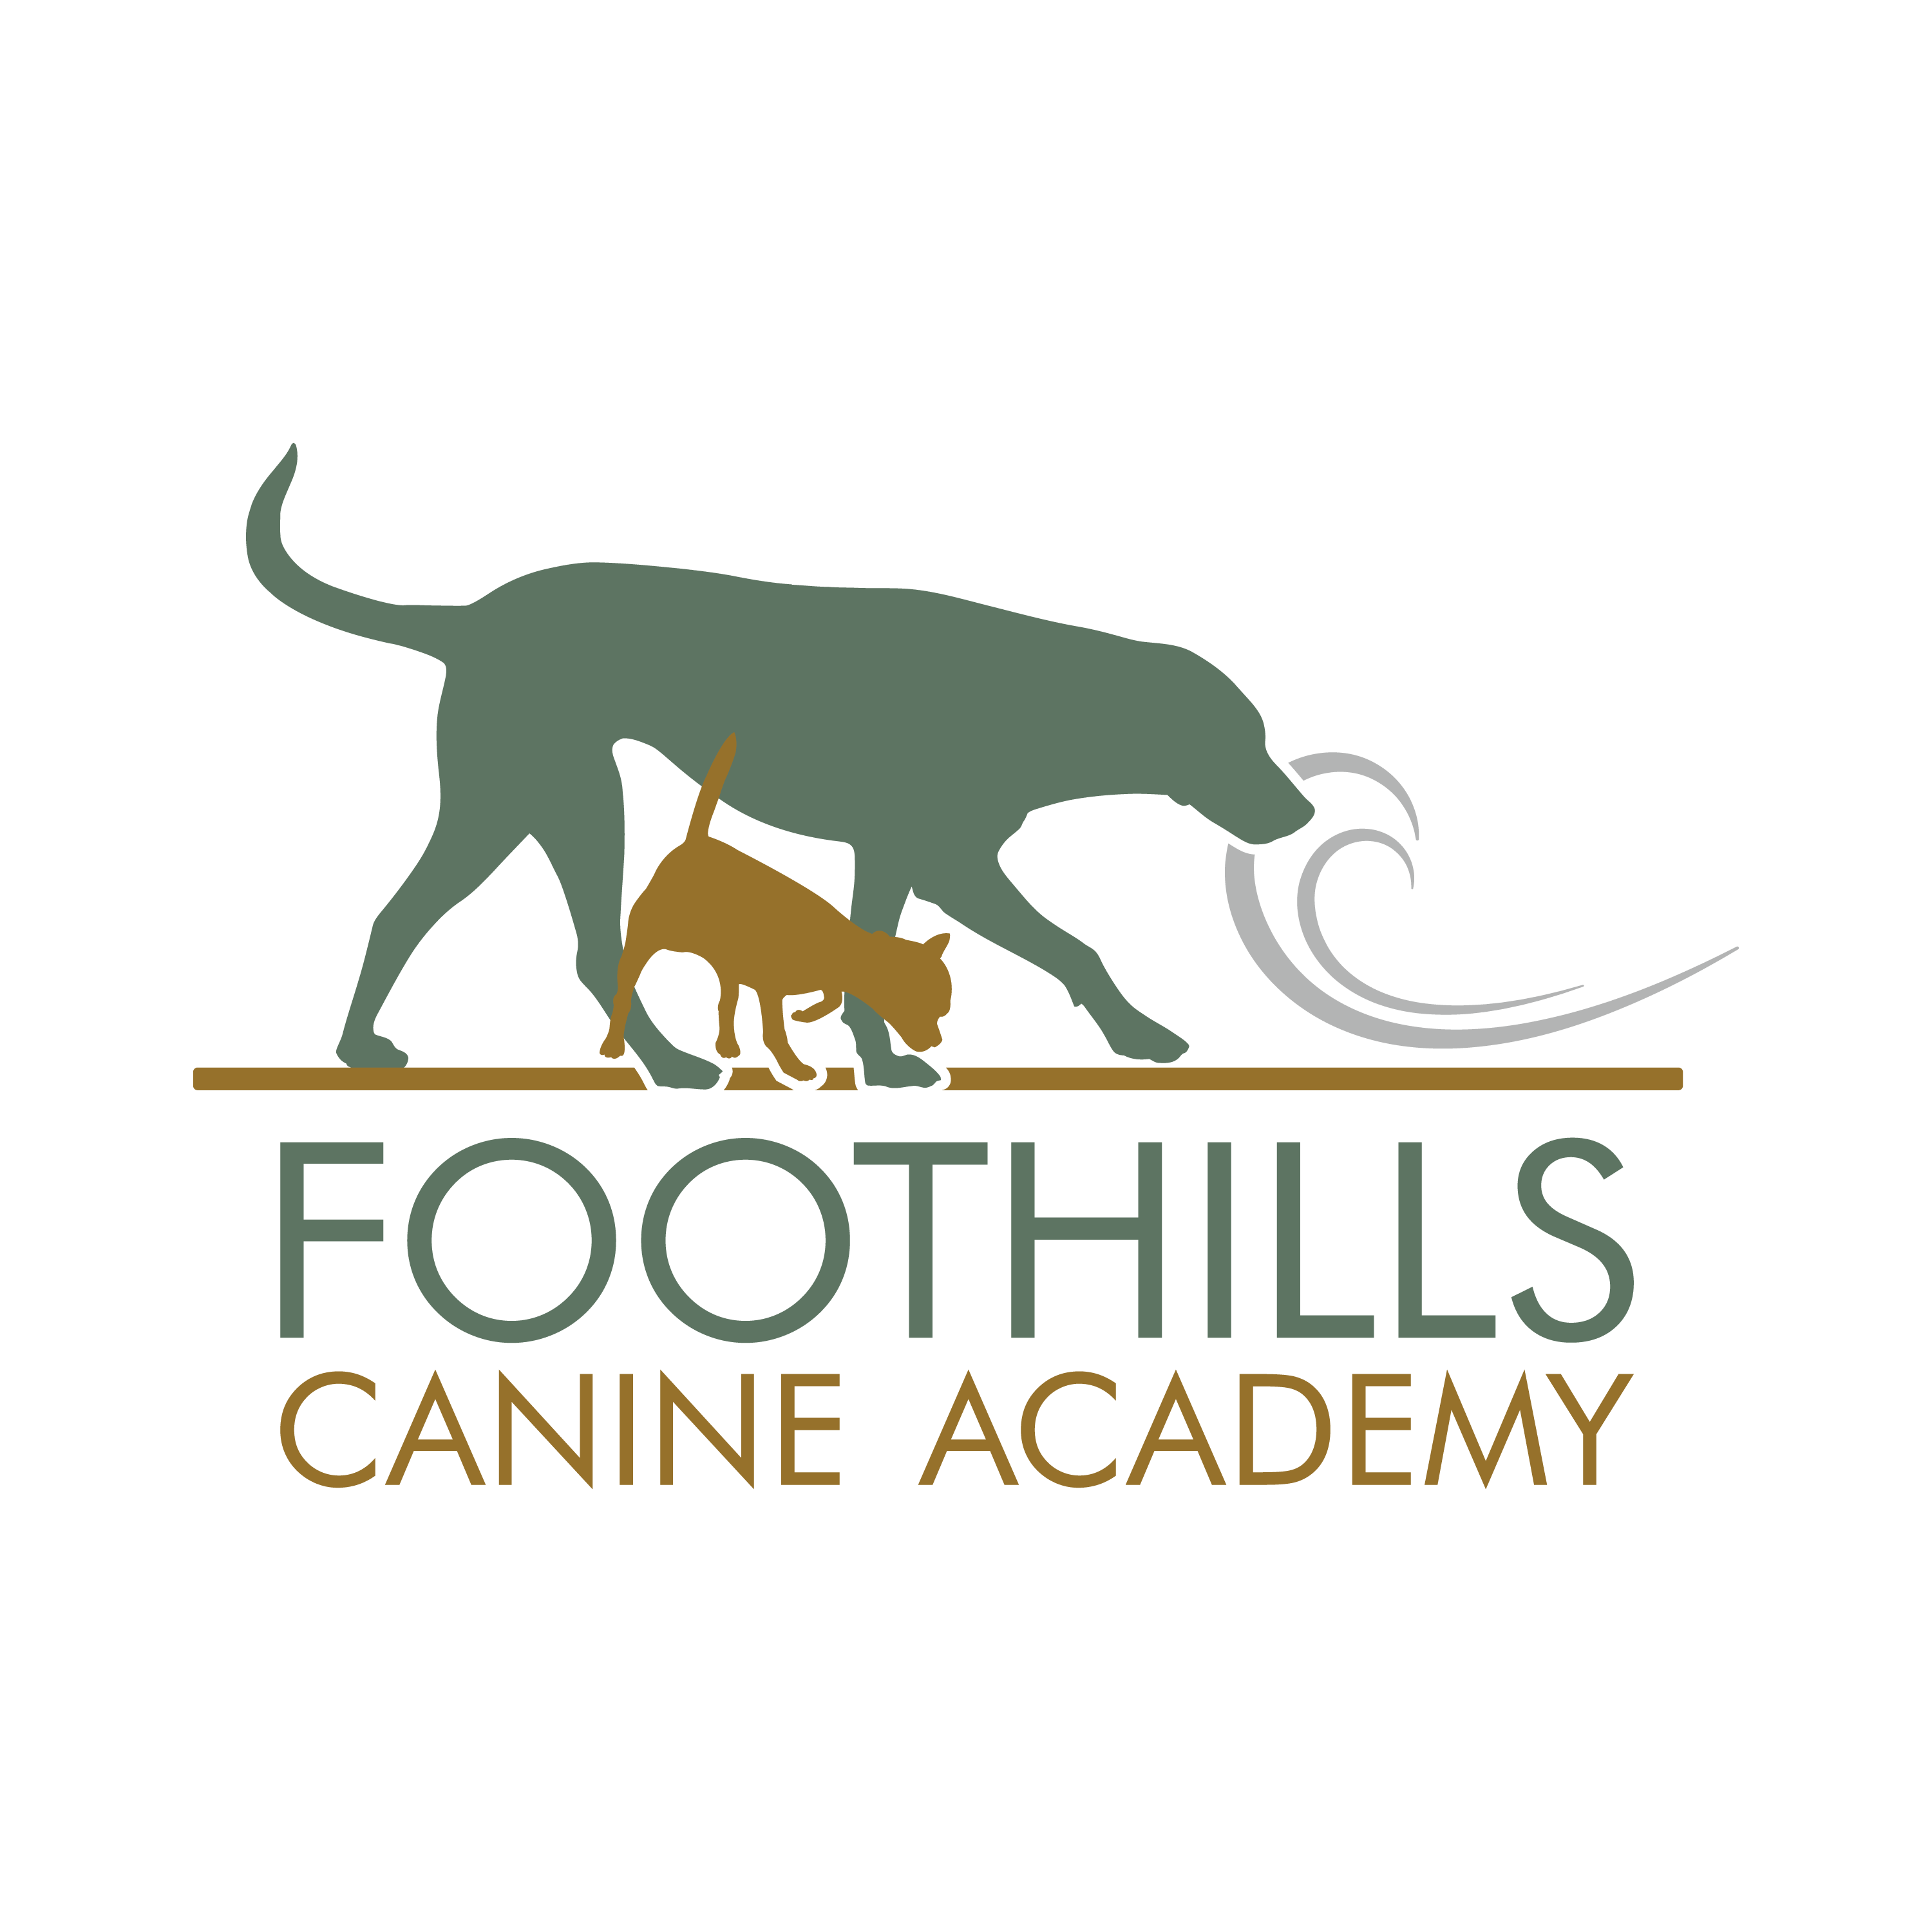 Foothills Canine Academy